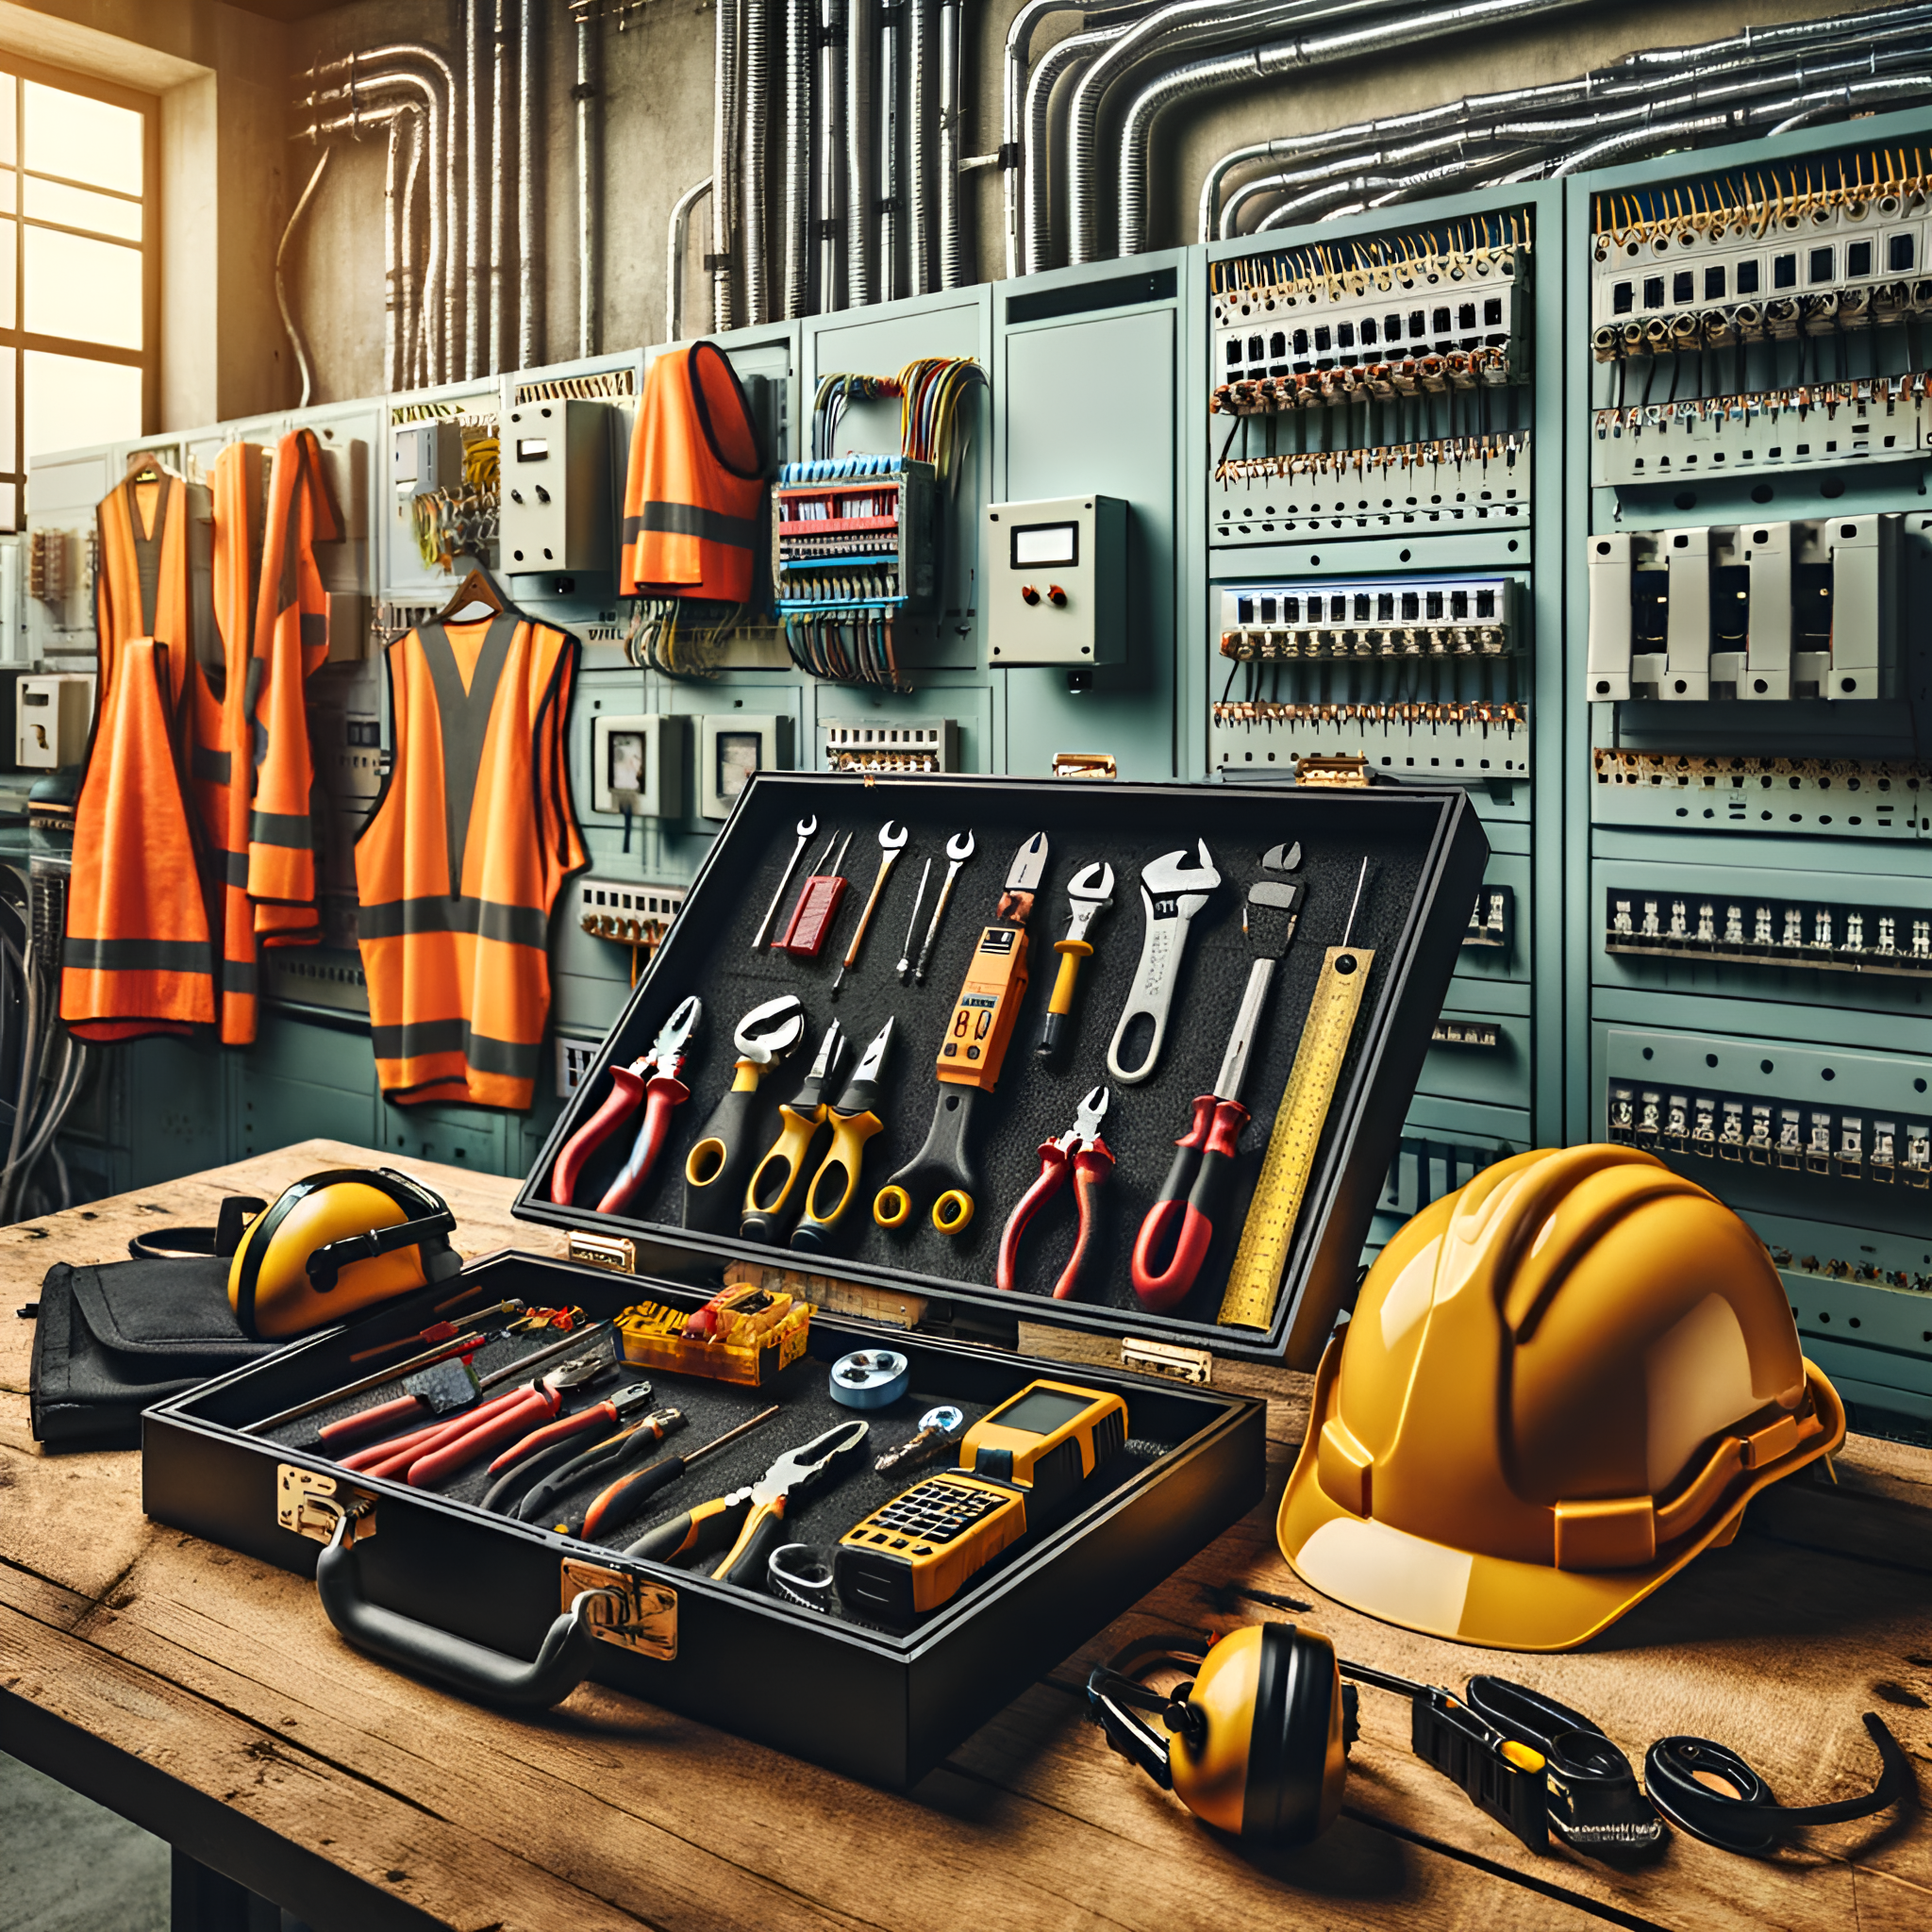 Electrical, Workspace, Blueprints, Tools, Safety Gear, Professional, Workbench, Electrical Panels, Expertise